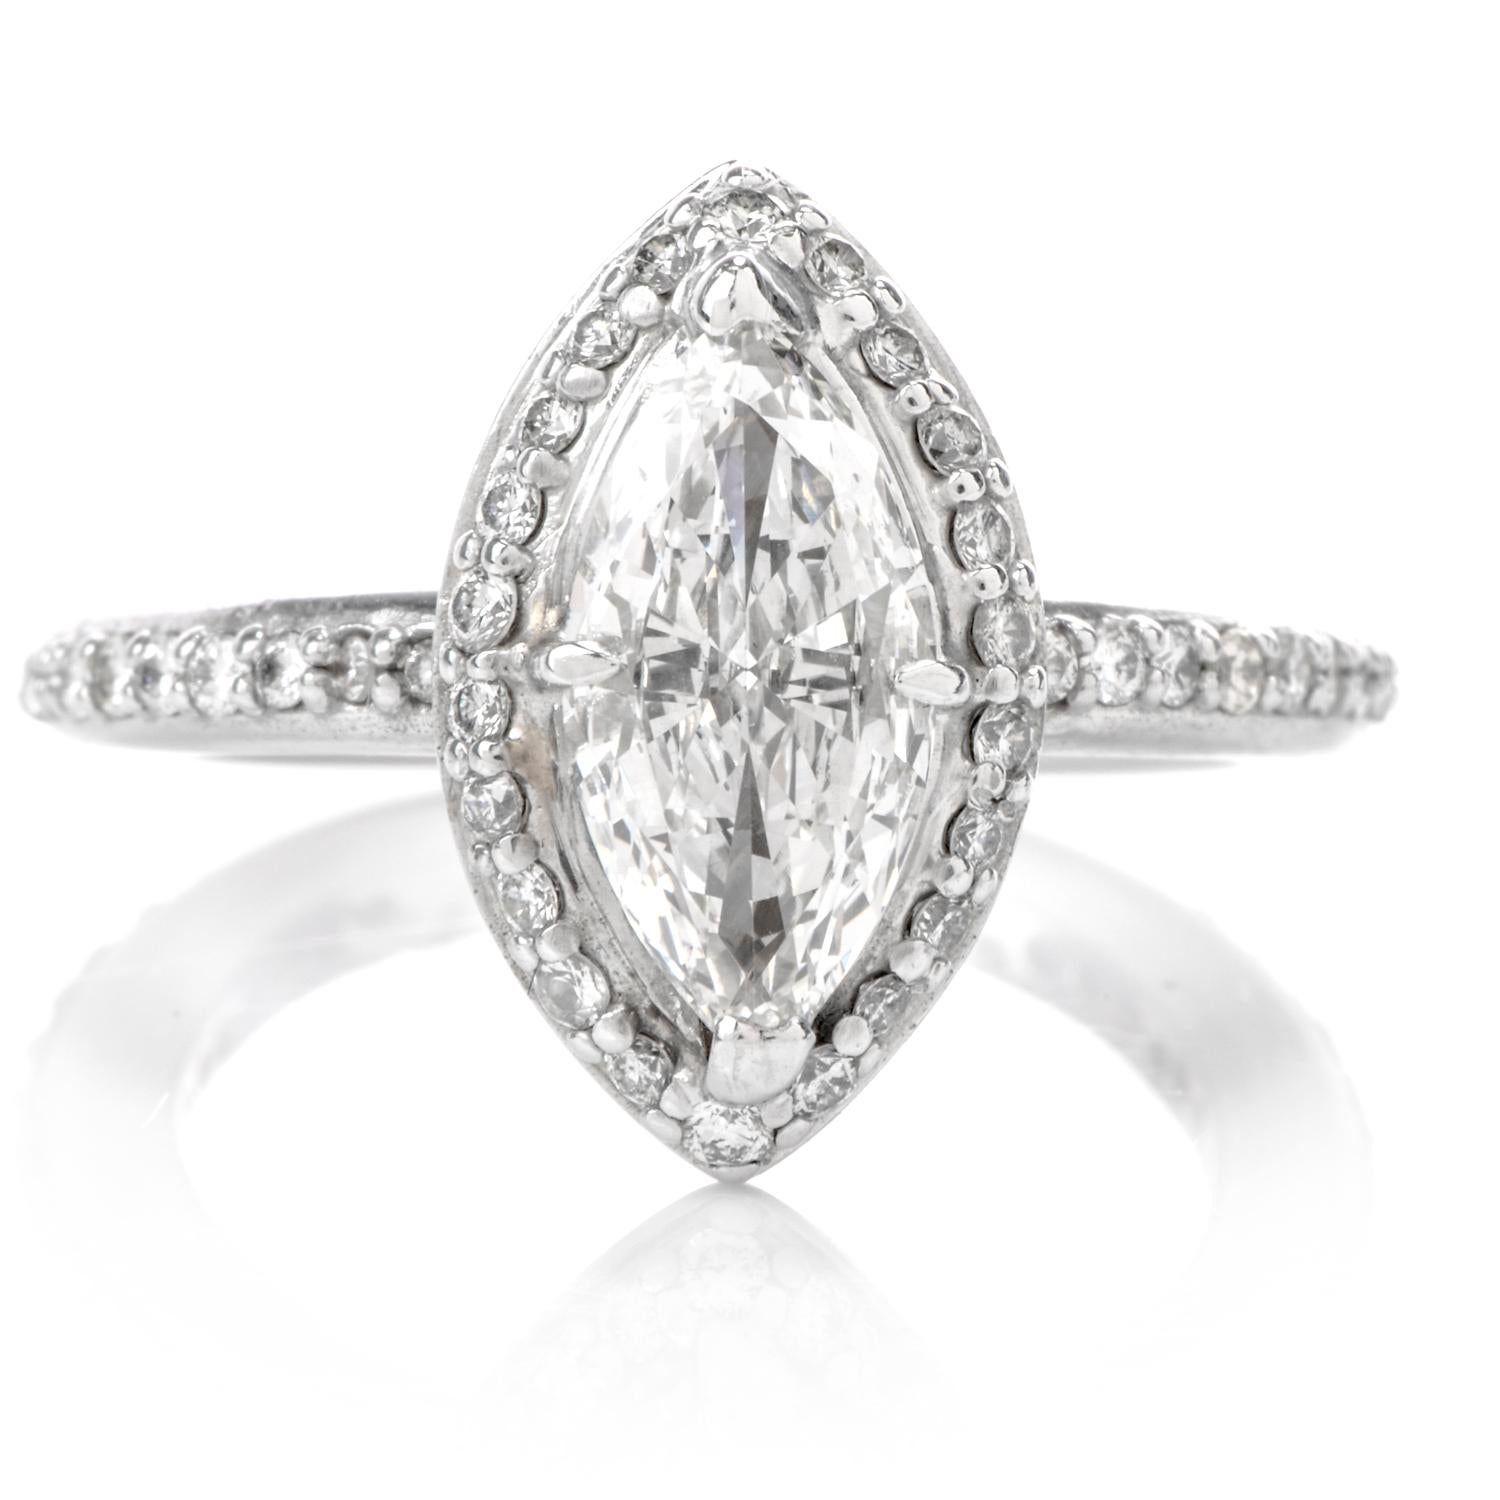 The Timeless Classic designed Diamond Engagement Ring displays a prominent Marquise Halo floating on top of a traditional DIamond band and is crafted in 14K White Gold. Centered atop the ring is a precisely shaped Halo of Diamonds with a Marquise